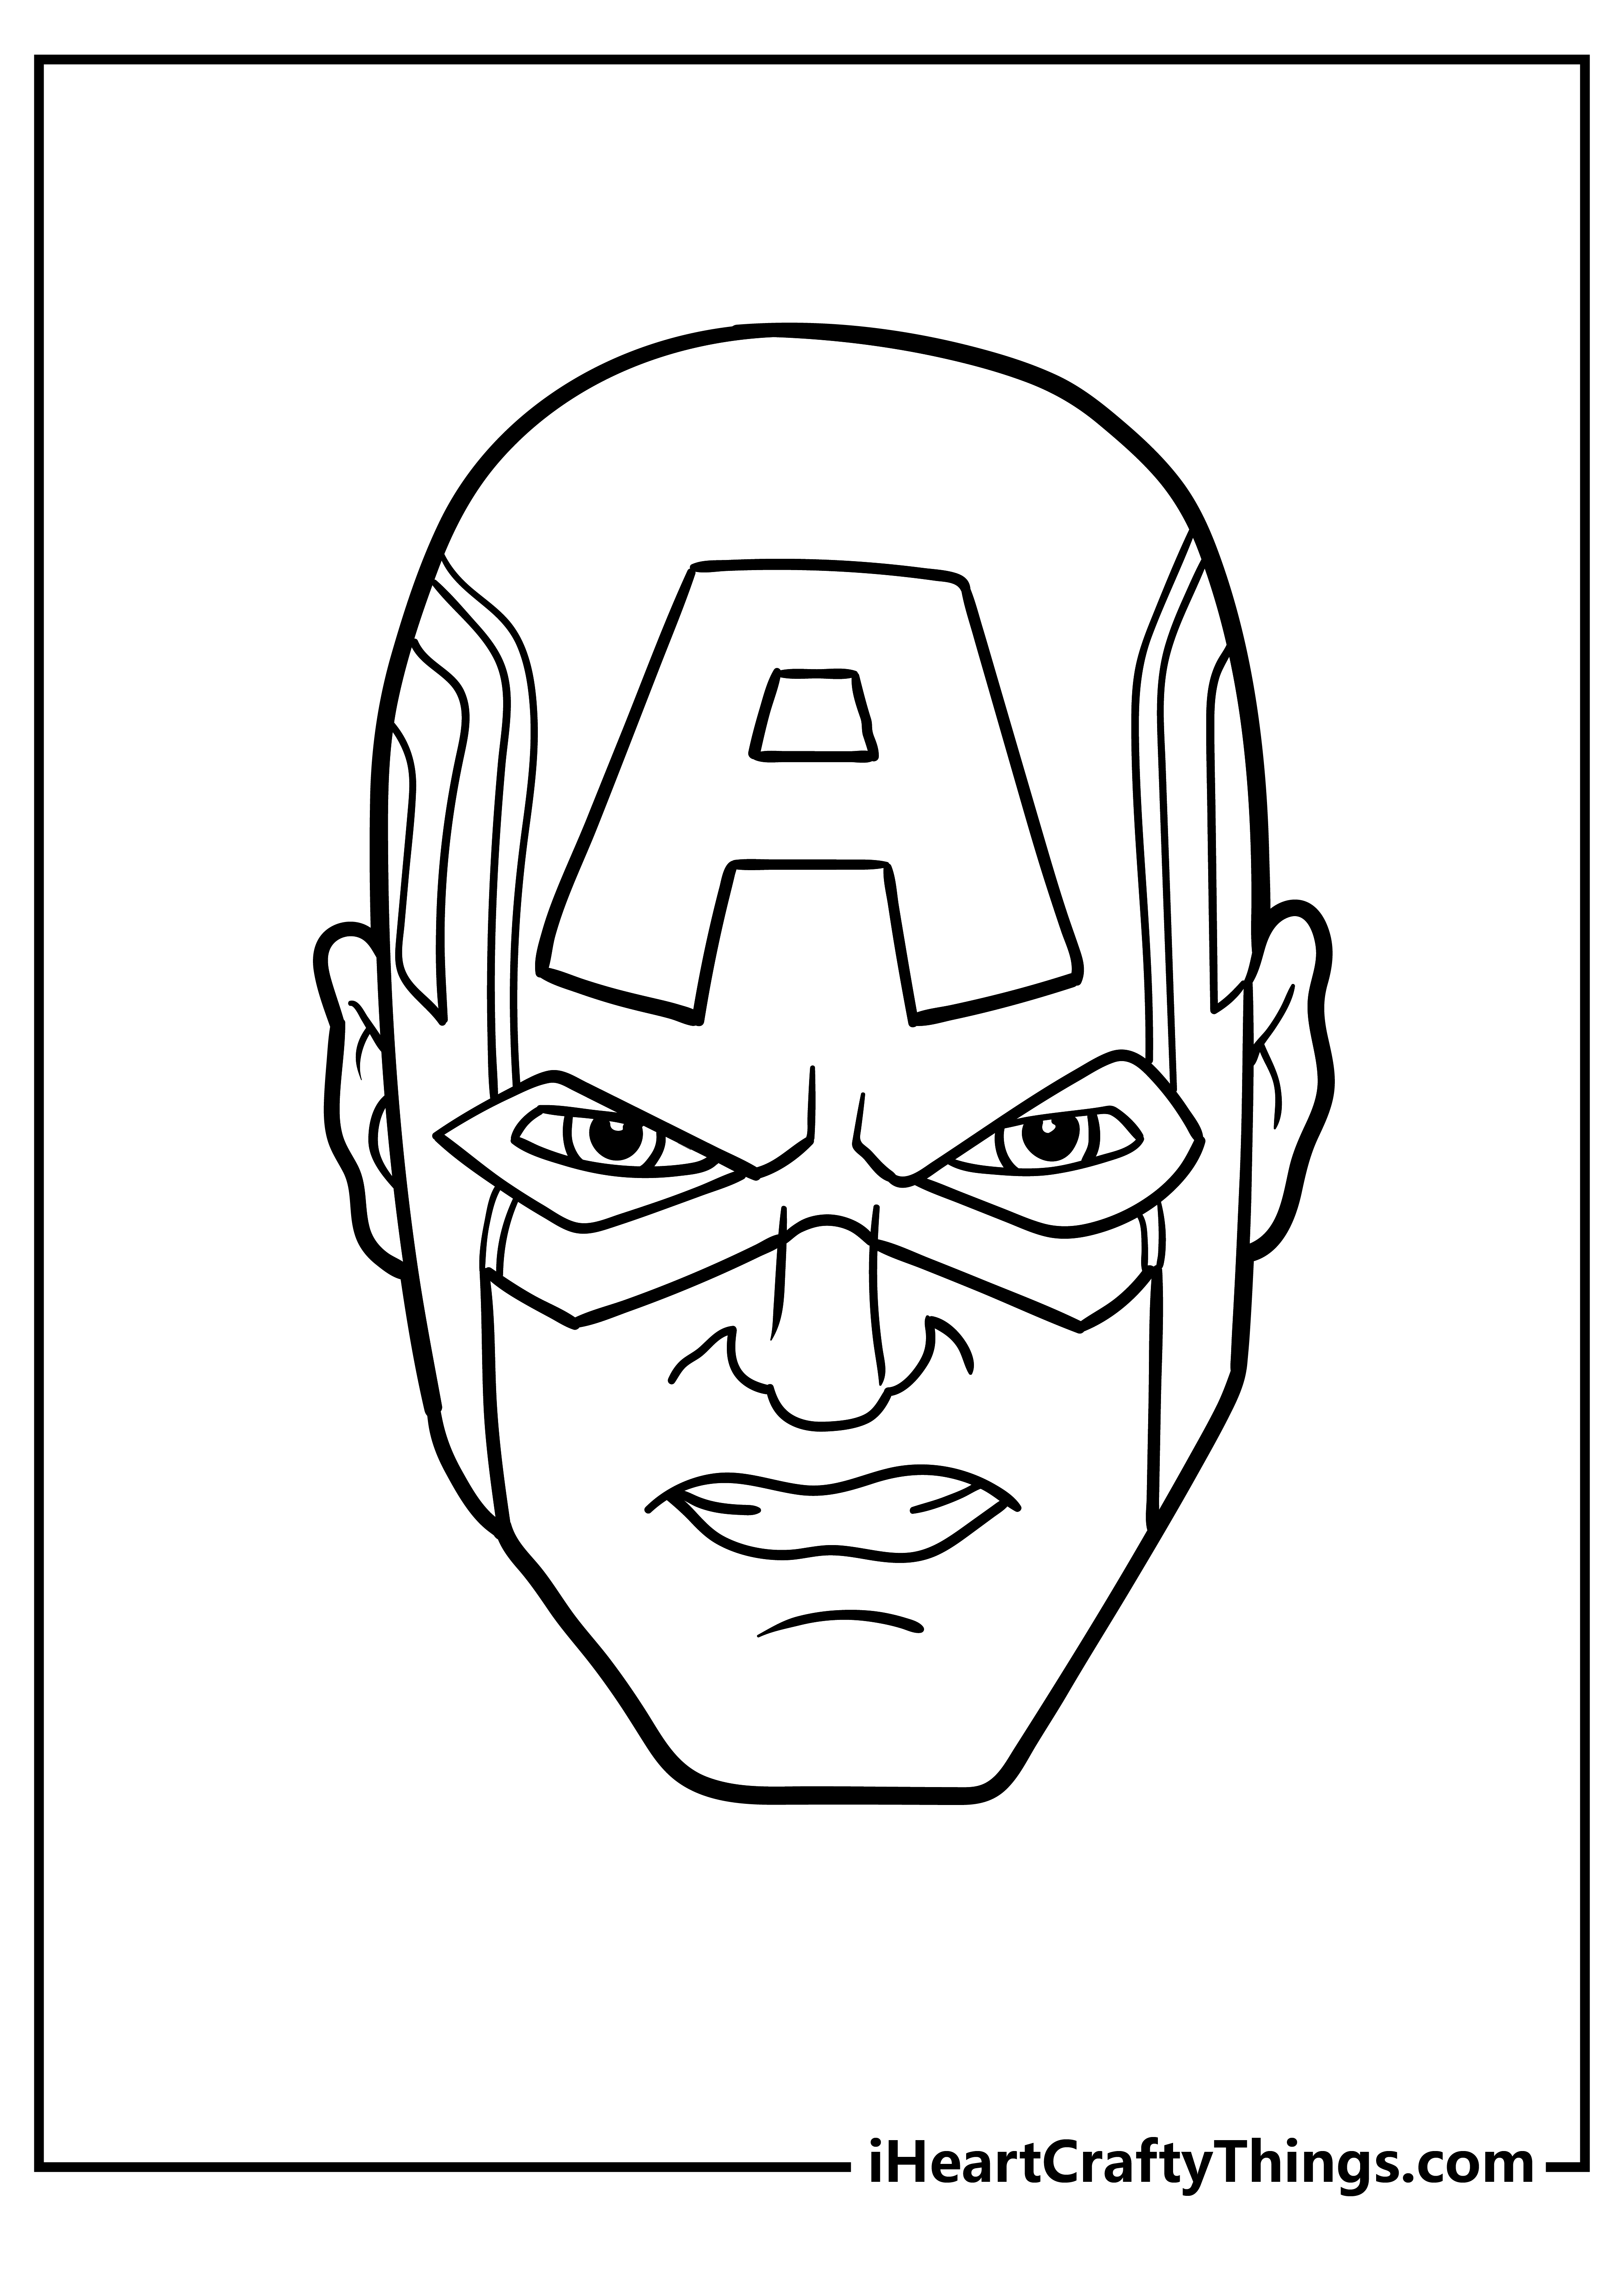 Captain America Coloring Pages for preschoolers free printable